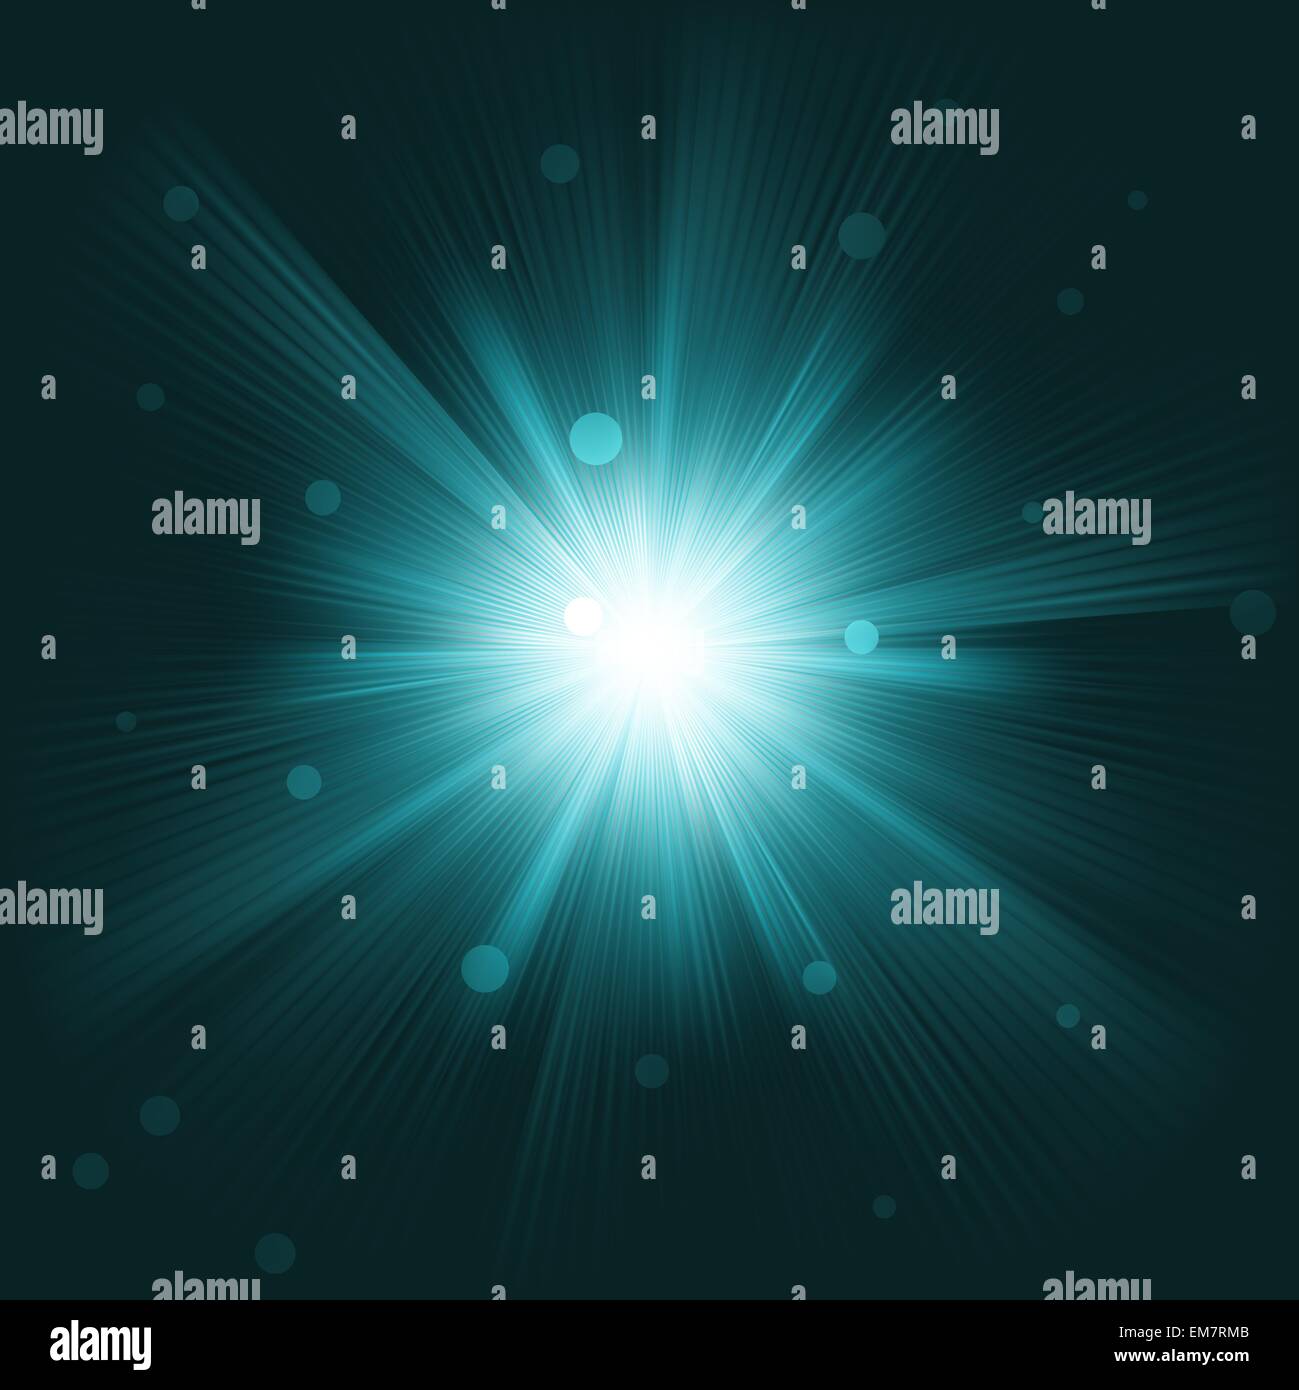 Glowing blue lens flare light effect background Vector Image